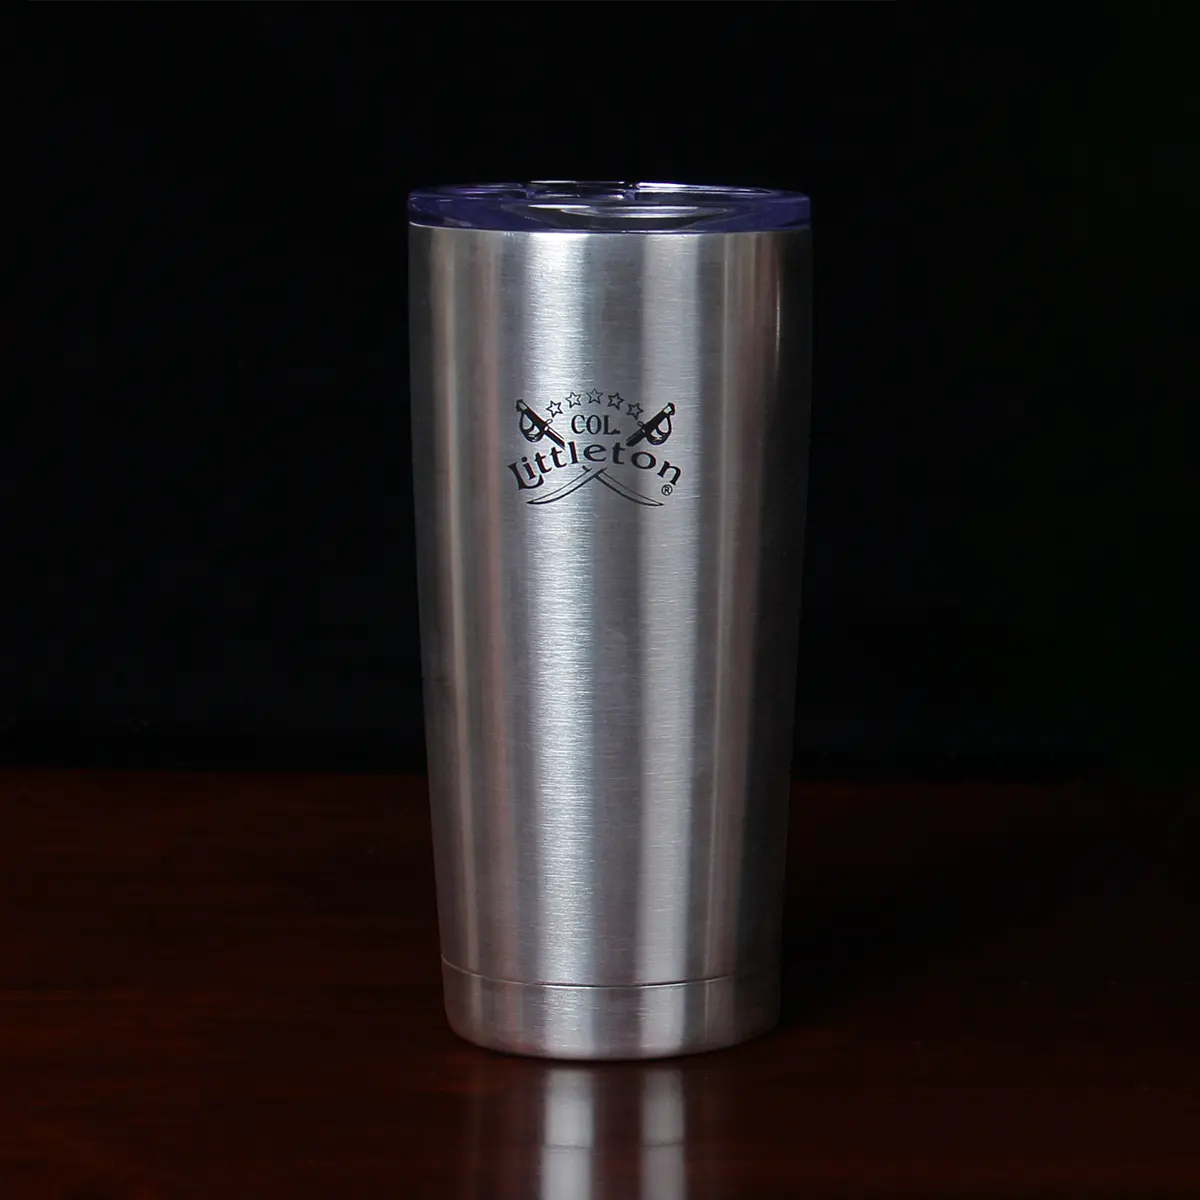 Leather Tumbler Set, Sleeve and Stainless Steel Cup